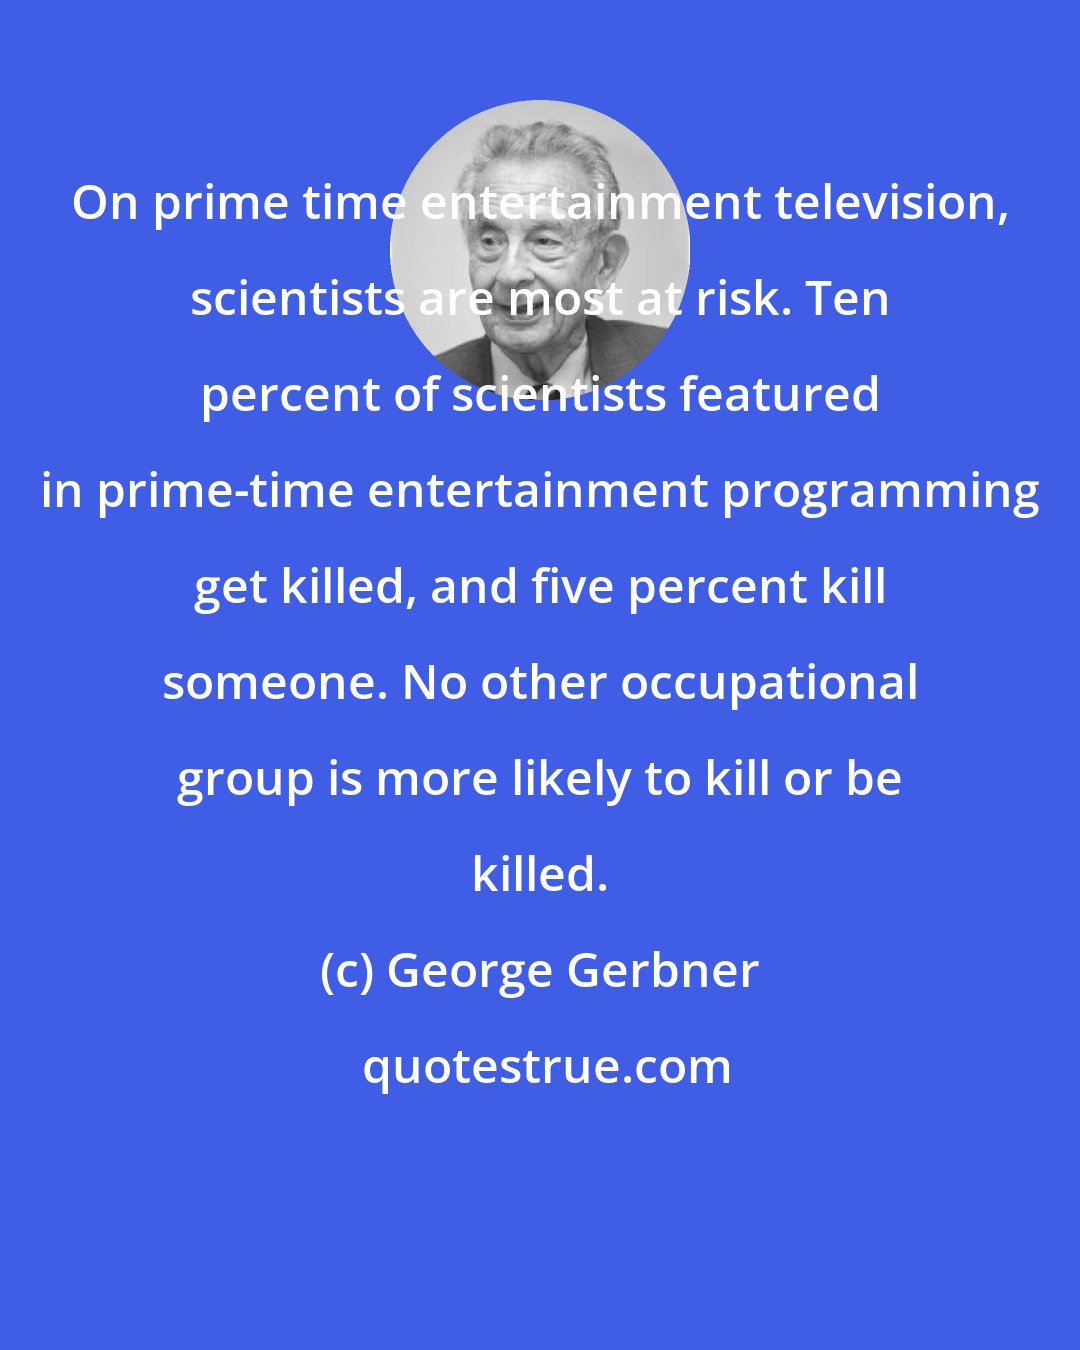 George Gerbner: On prime time entertainment television, scientists are most at risk. Ten percent of scientists featured in prime-time entertainment programming get killed, and five percent kill someone. No other occupational group is more likely to kill or be killed.